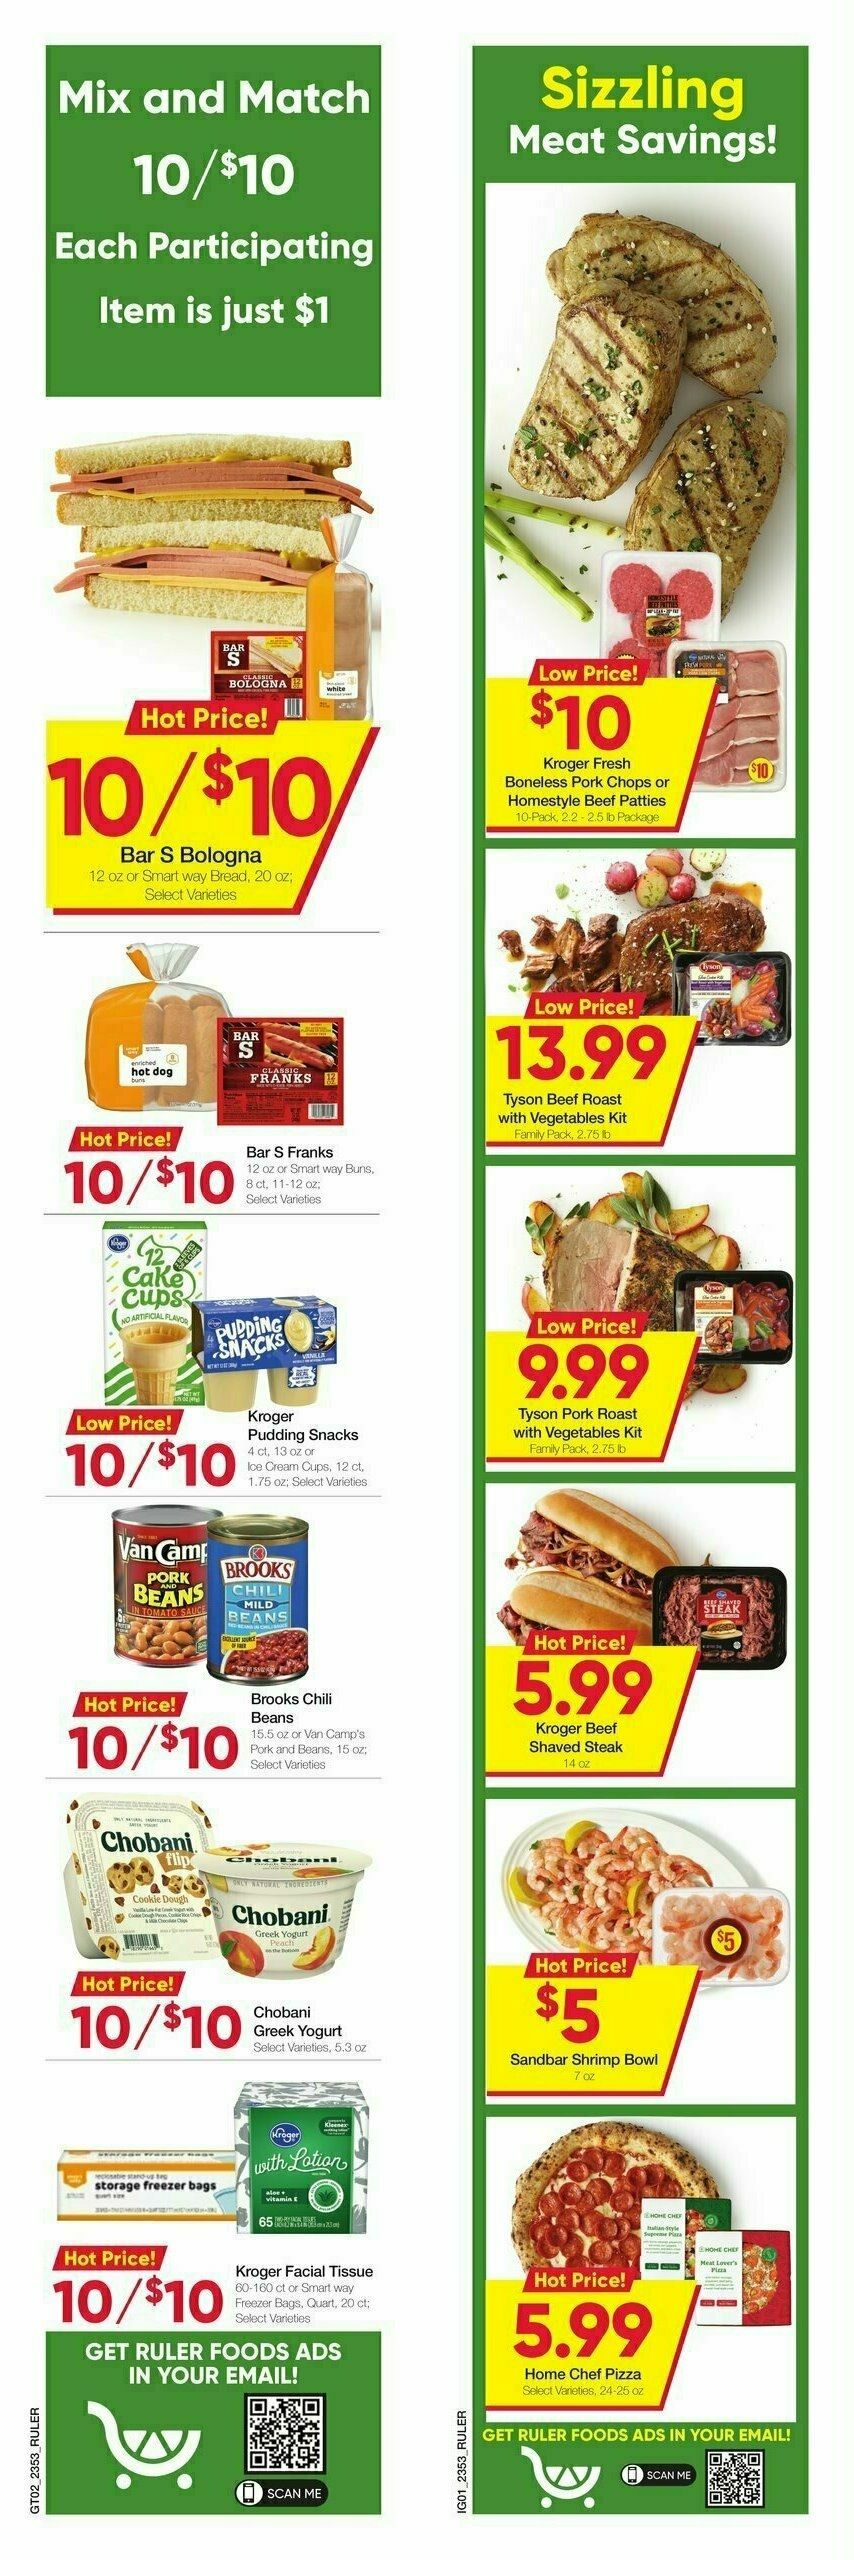 Ruler Foods Weekly Ad from January 31